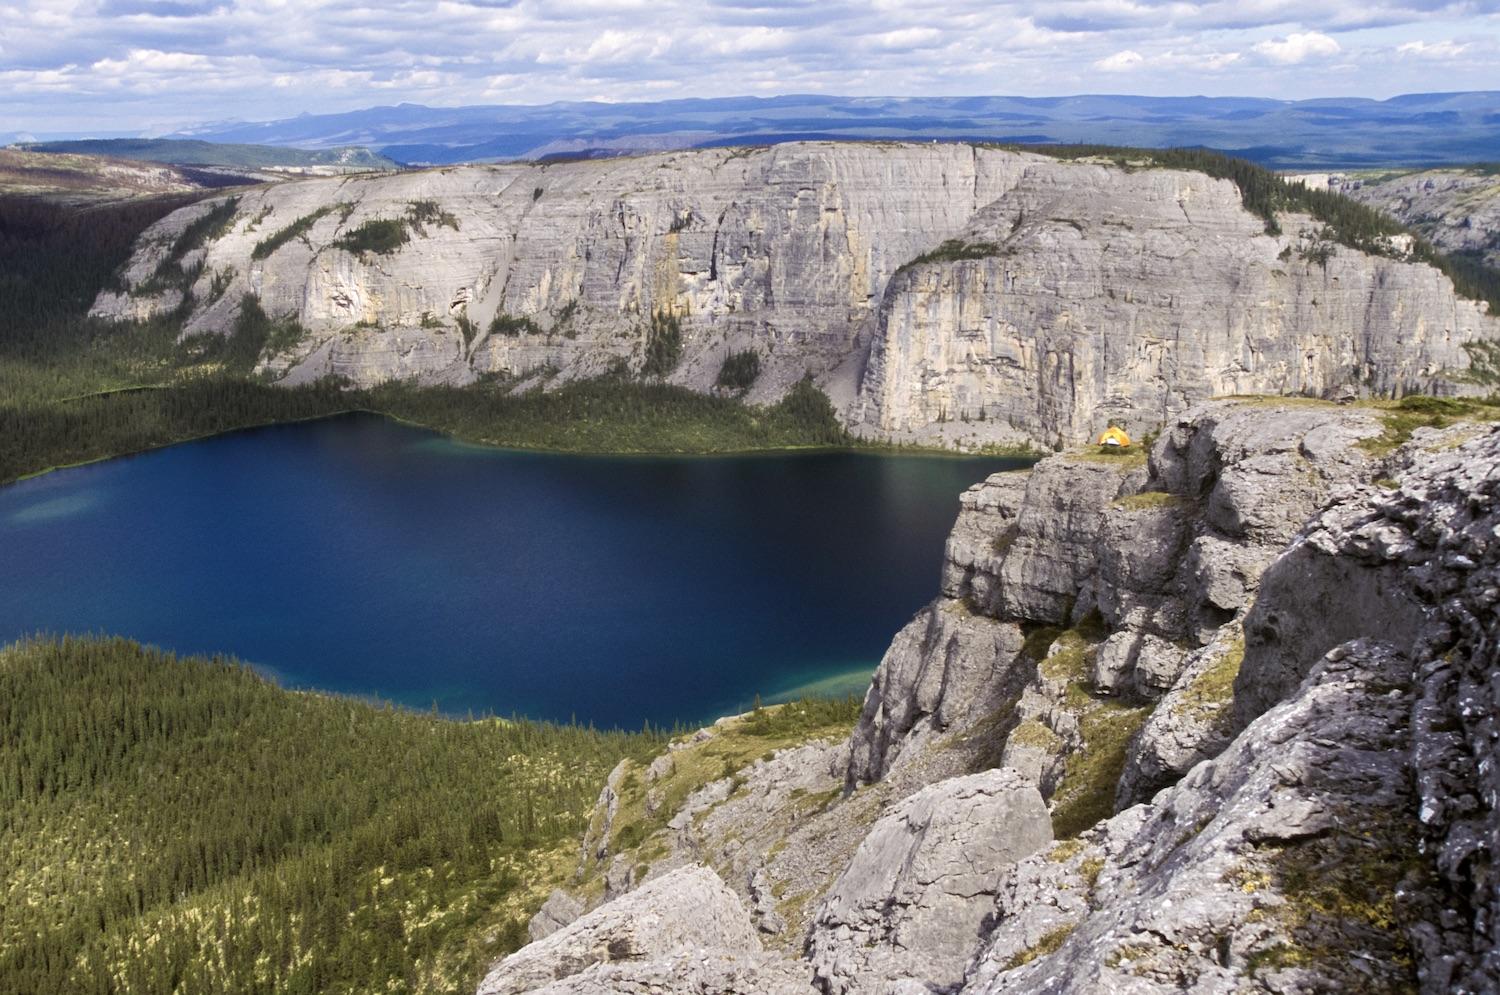 Nahanni National Park Reserve (Nah?ą Dehé) is a UNESCO World Heritage Site globally renowned for its geologic landforms. 